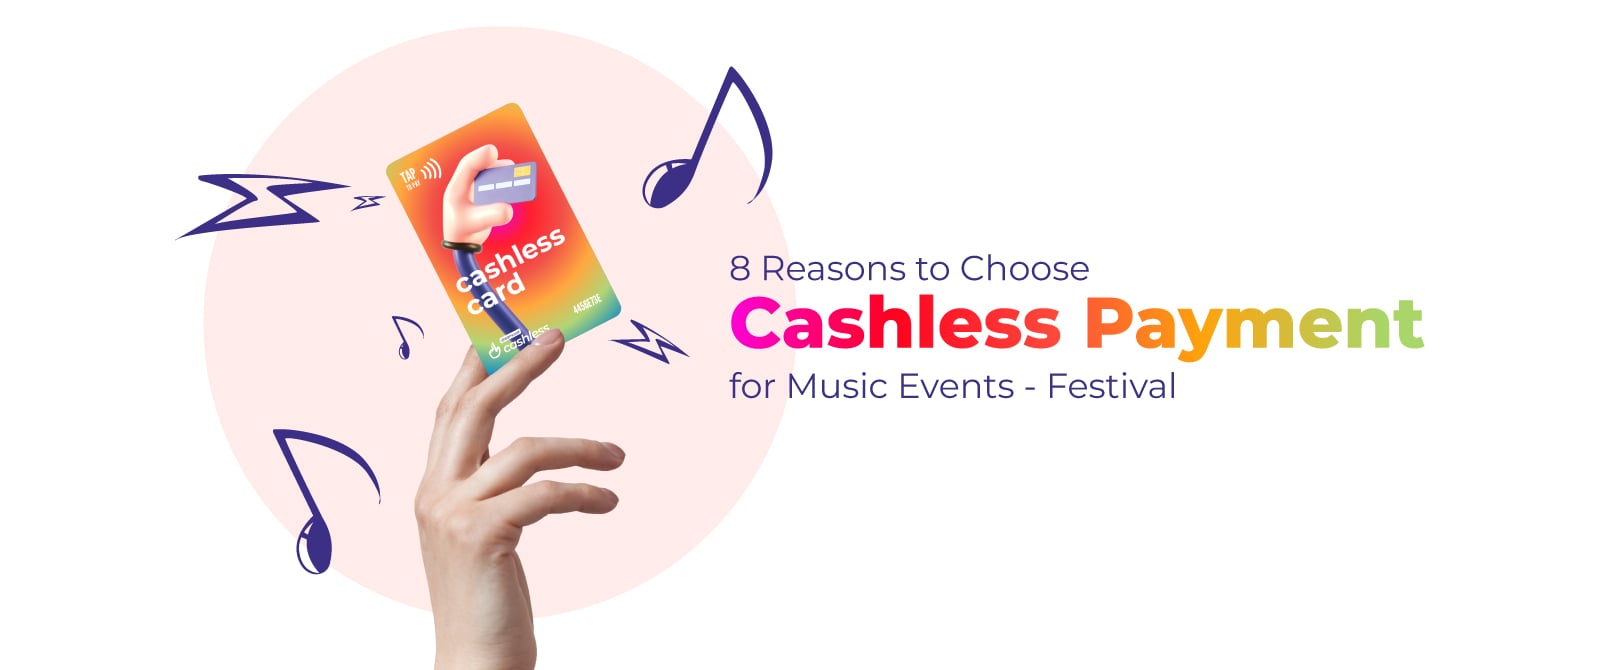 8 Reasons to Choose Cashless Payment for Music Events and Festival